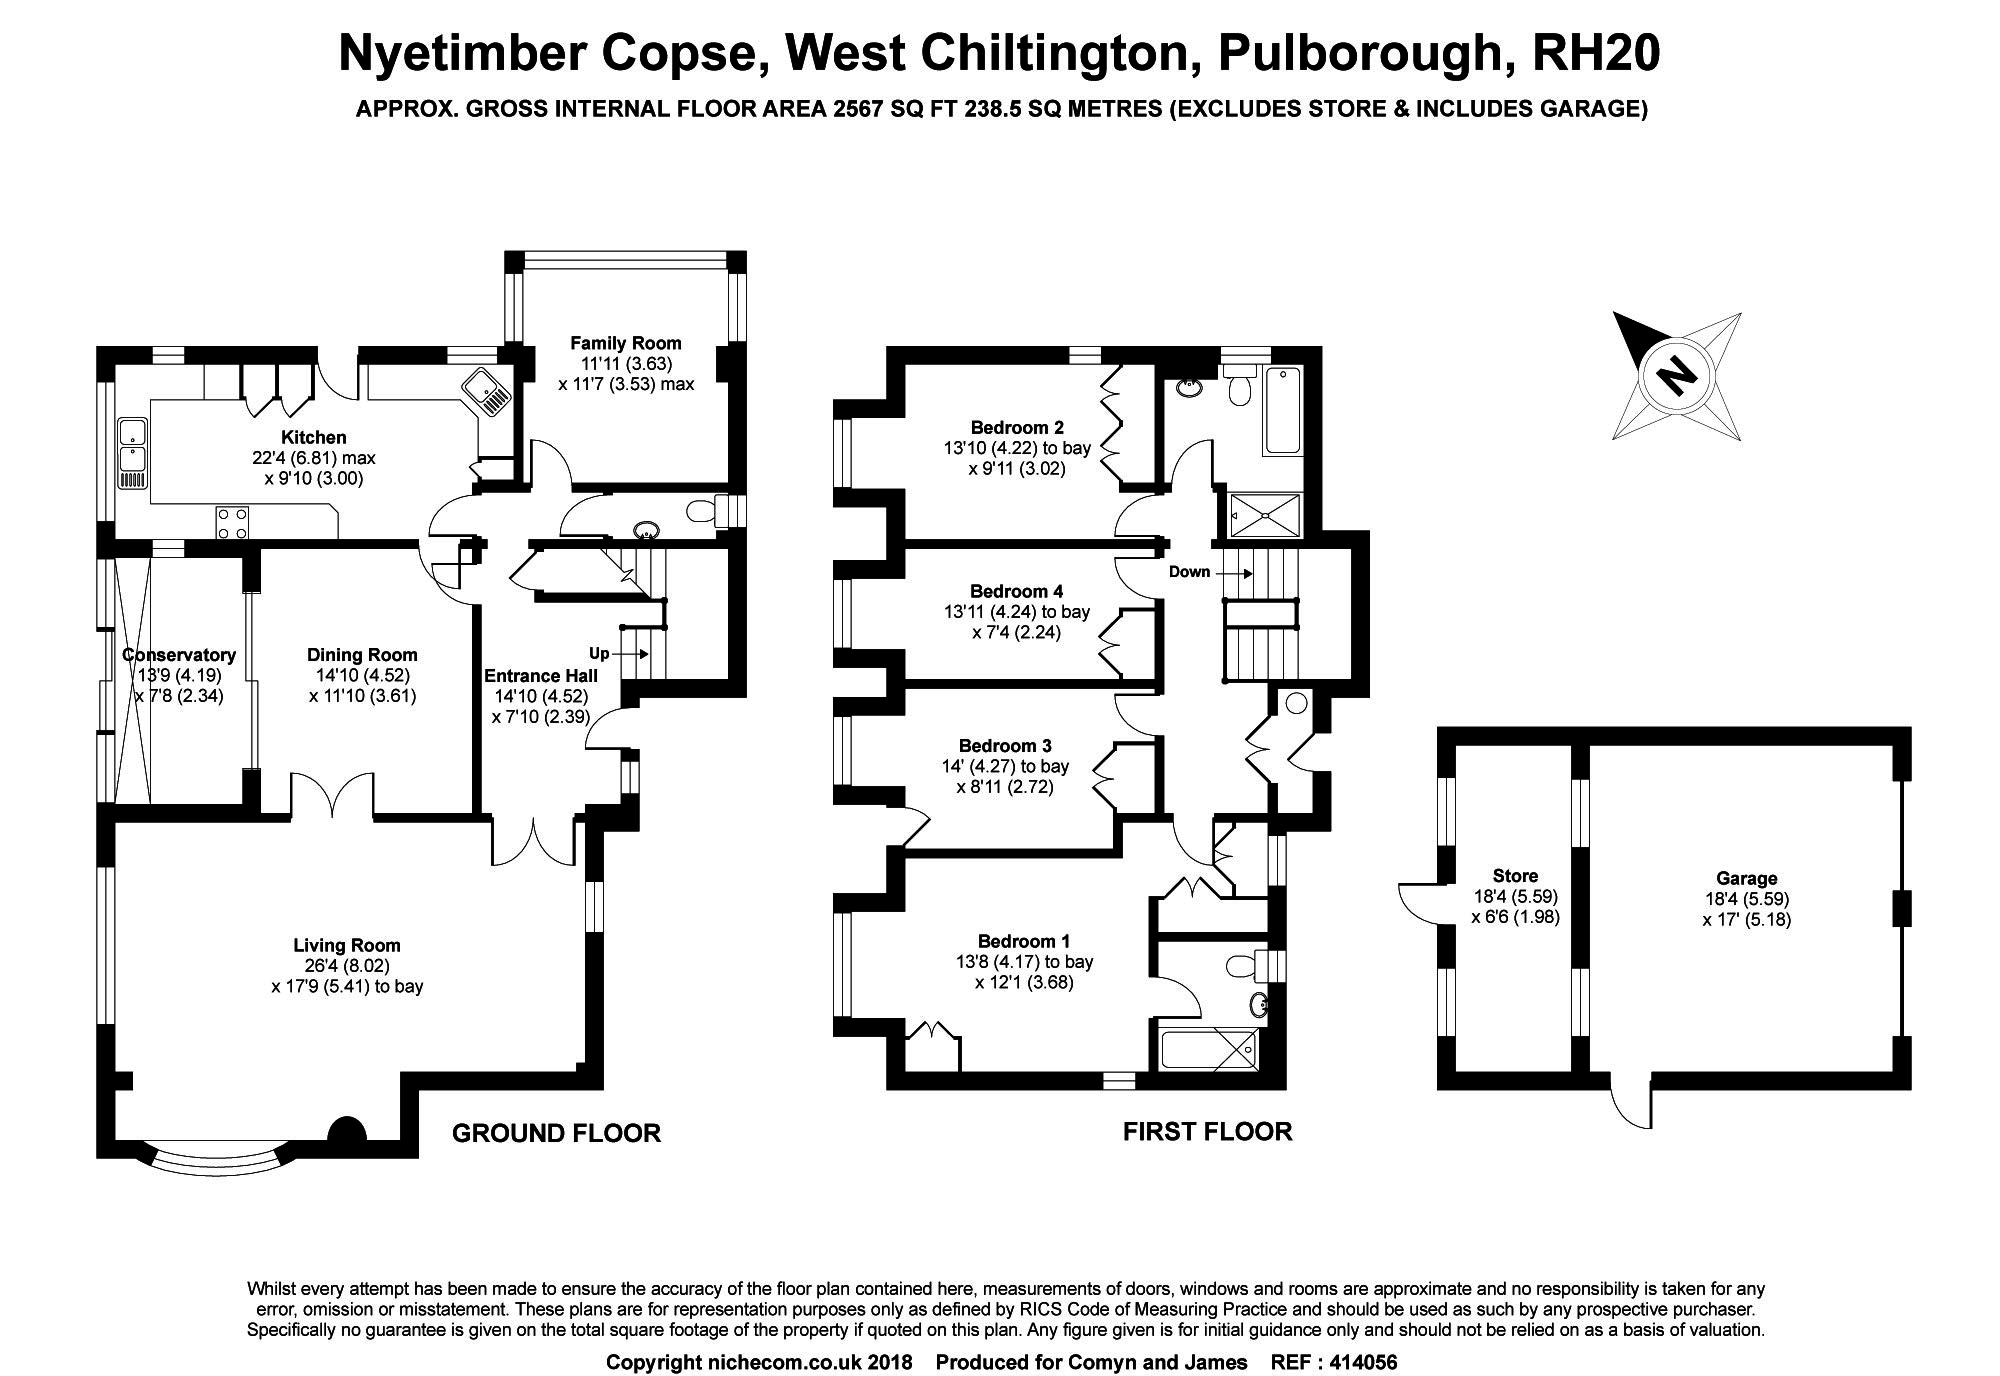 4 Bedrooms Chalet for sale in Nyetimber Copse, West Chiltington, Pulborough RH20